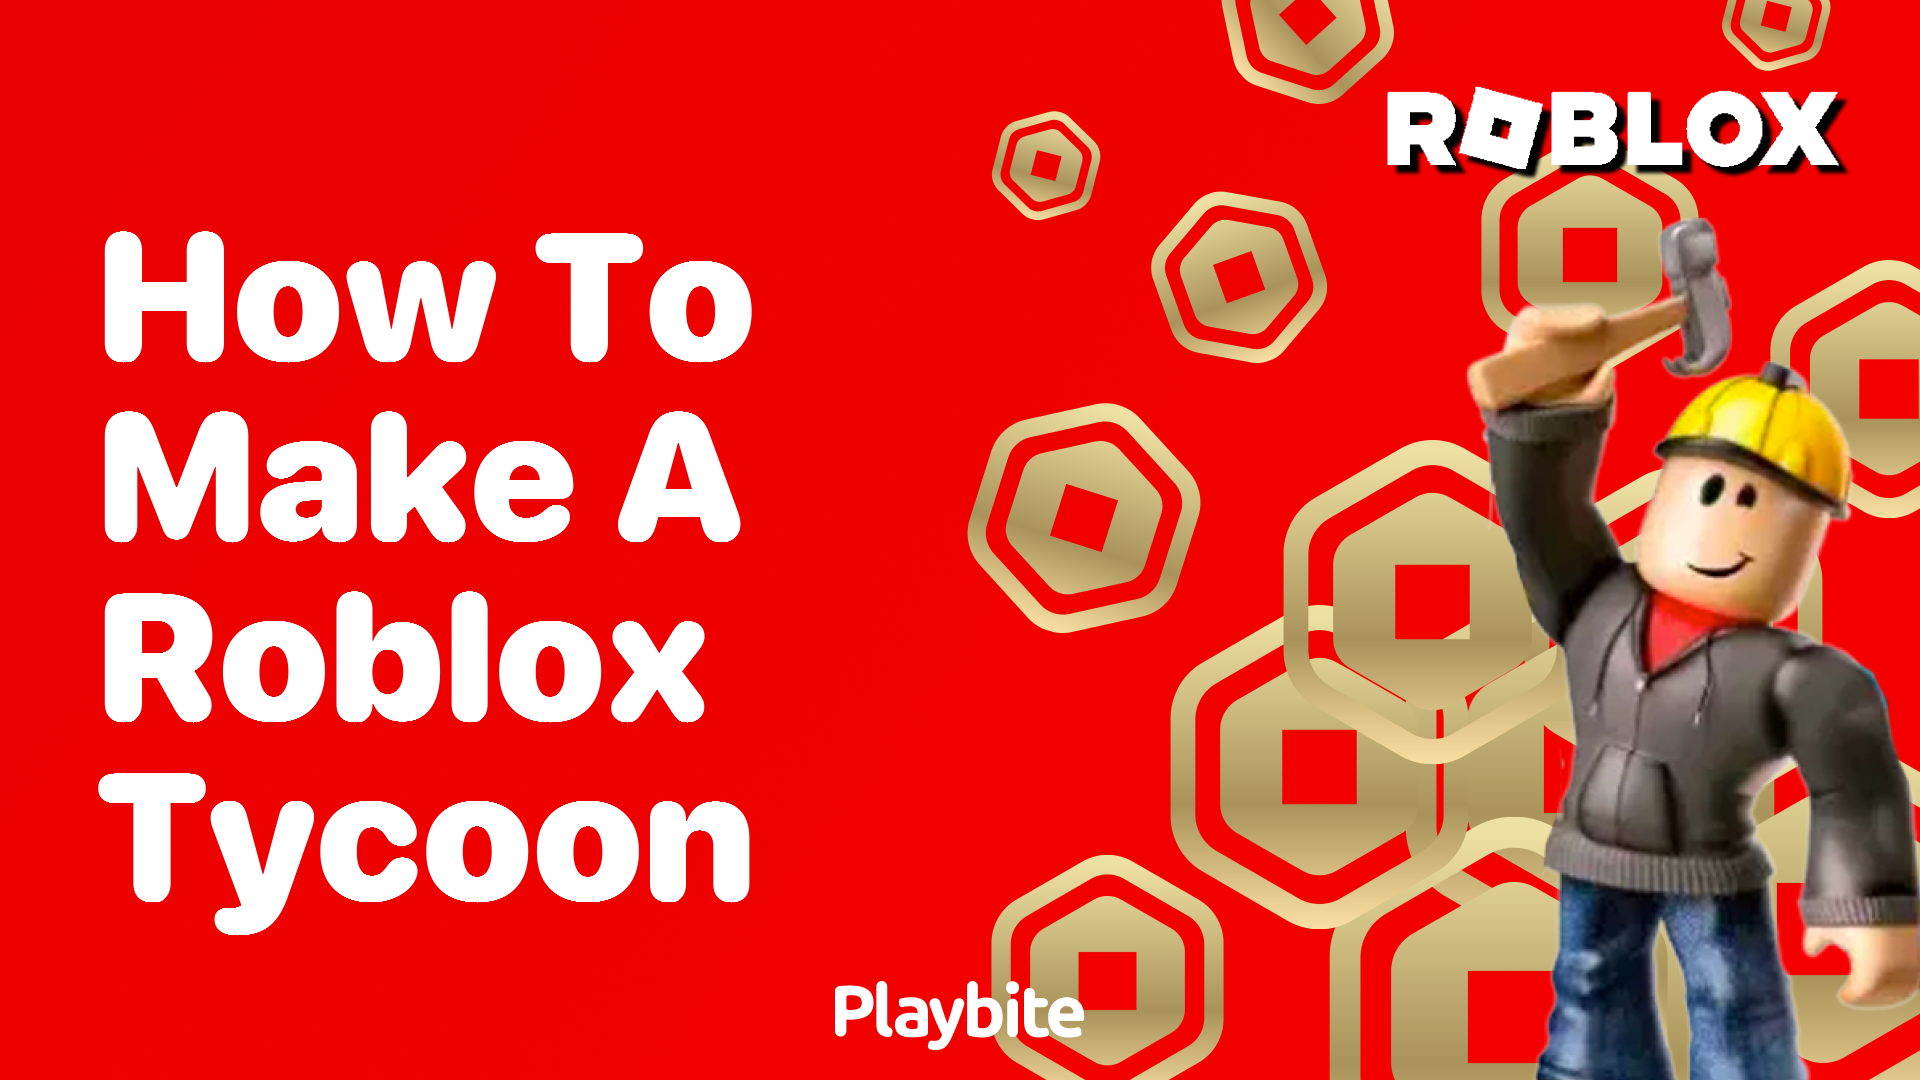 How to Make a Roblox Tycoon From Scratch